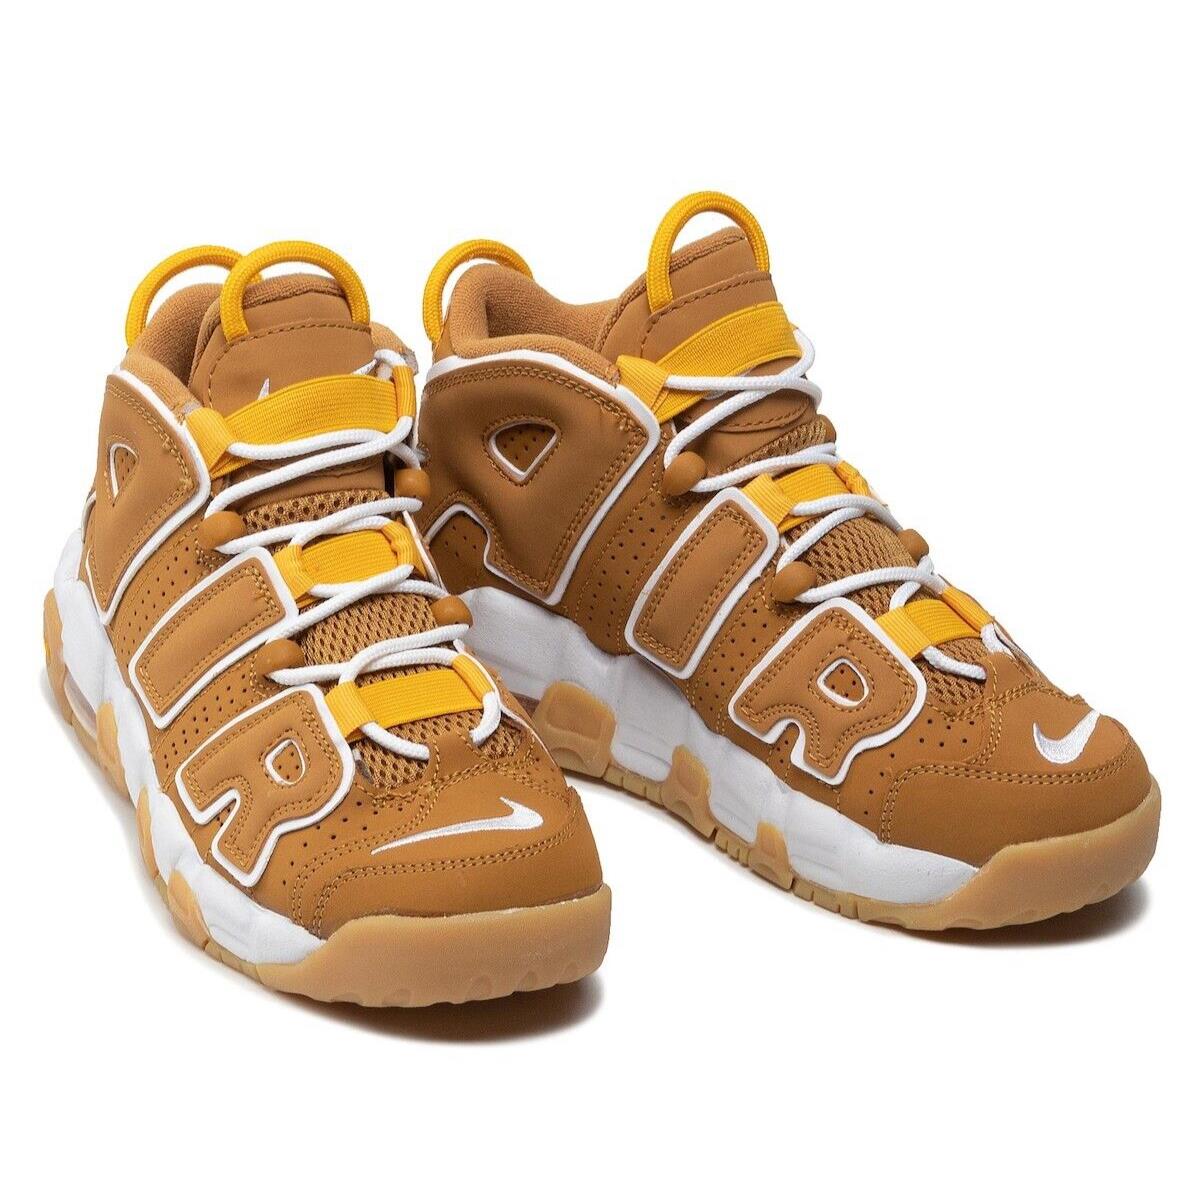 Women 6.5US Nike Air More Uptempo Wheat Basketball Sports Shoes DQ4713 Men 5US - Brown